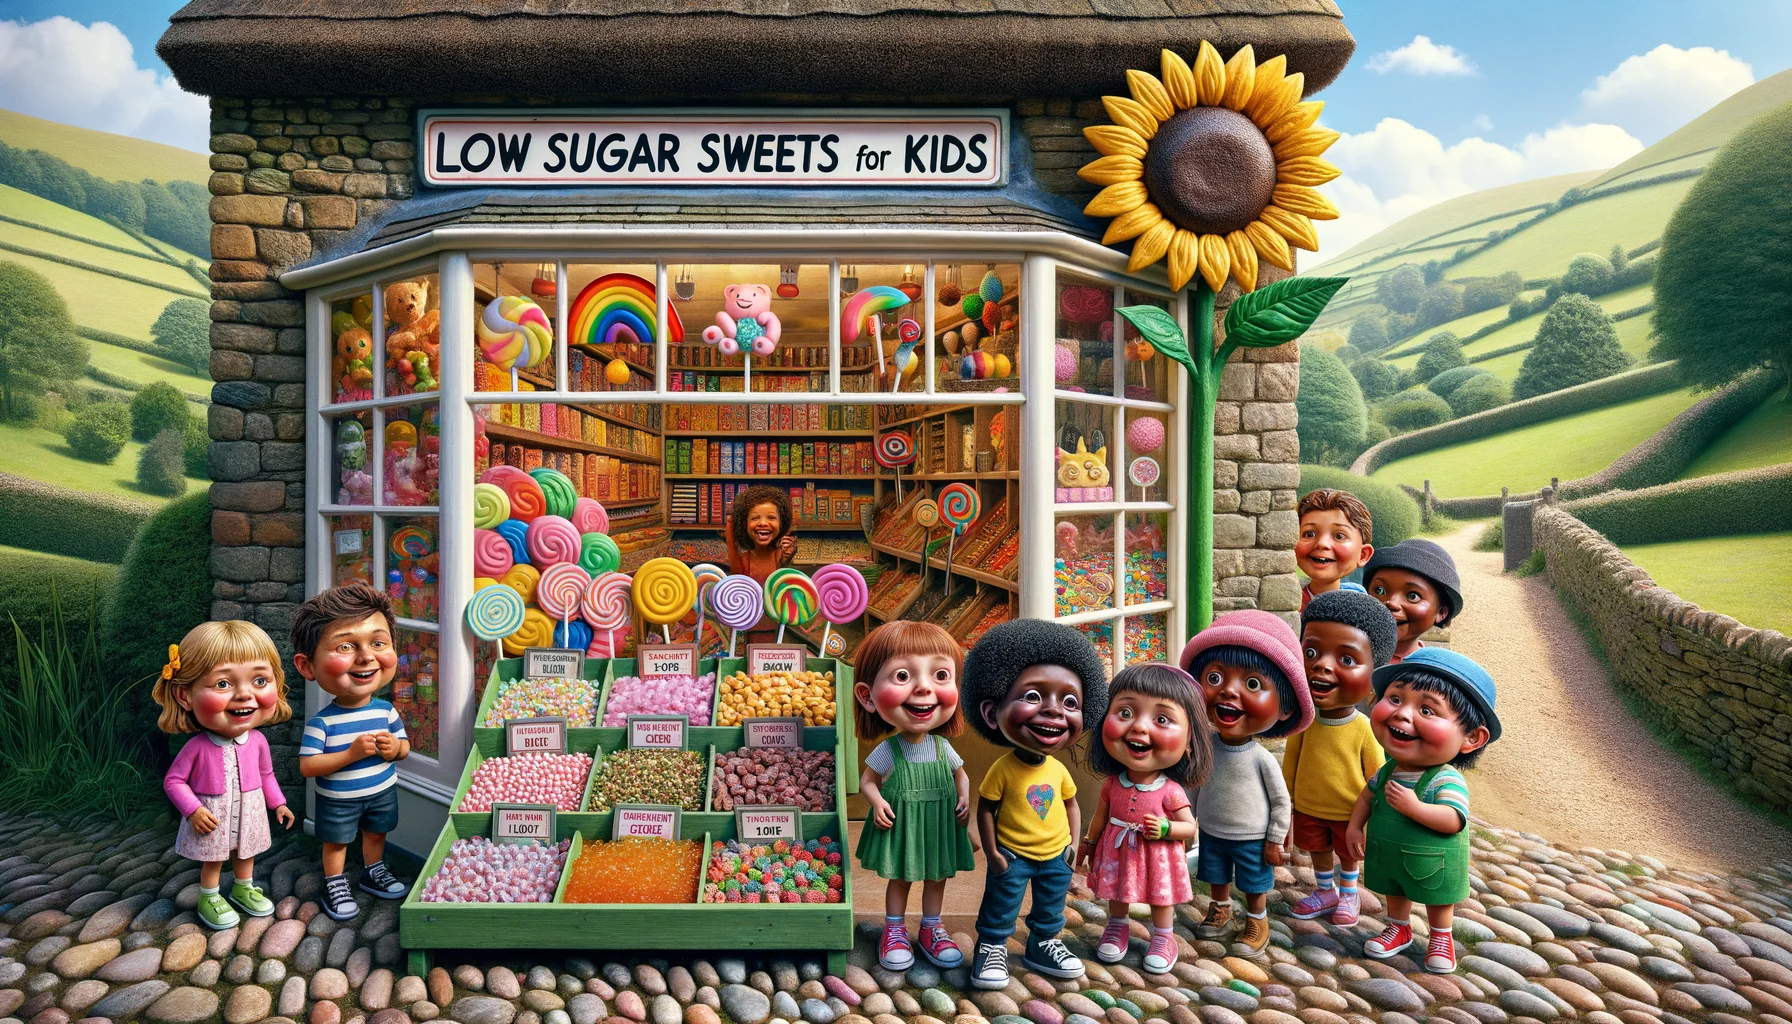 An amusing and lifelike image of a quaint, colourful candy store situated in an idyllic countryside setting. Upon close inspection, you'll see a section dedicated to 'Low Sugar Sweets for Kids', signposted by a big sunflower, with an array of whimsical candies like rainbow lollipops, pastel jelly beans, and playful marzipan creatures, all labeled as low sugar. Among the customers are diverse group of children - a Middle-Eastern girl with pigtails, a Caucasian boy wearing glasses, a black girl dressed brightly in green, and a South Asian boy with a wide smile. All of their faces burst with anticipation and sheer delight.